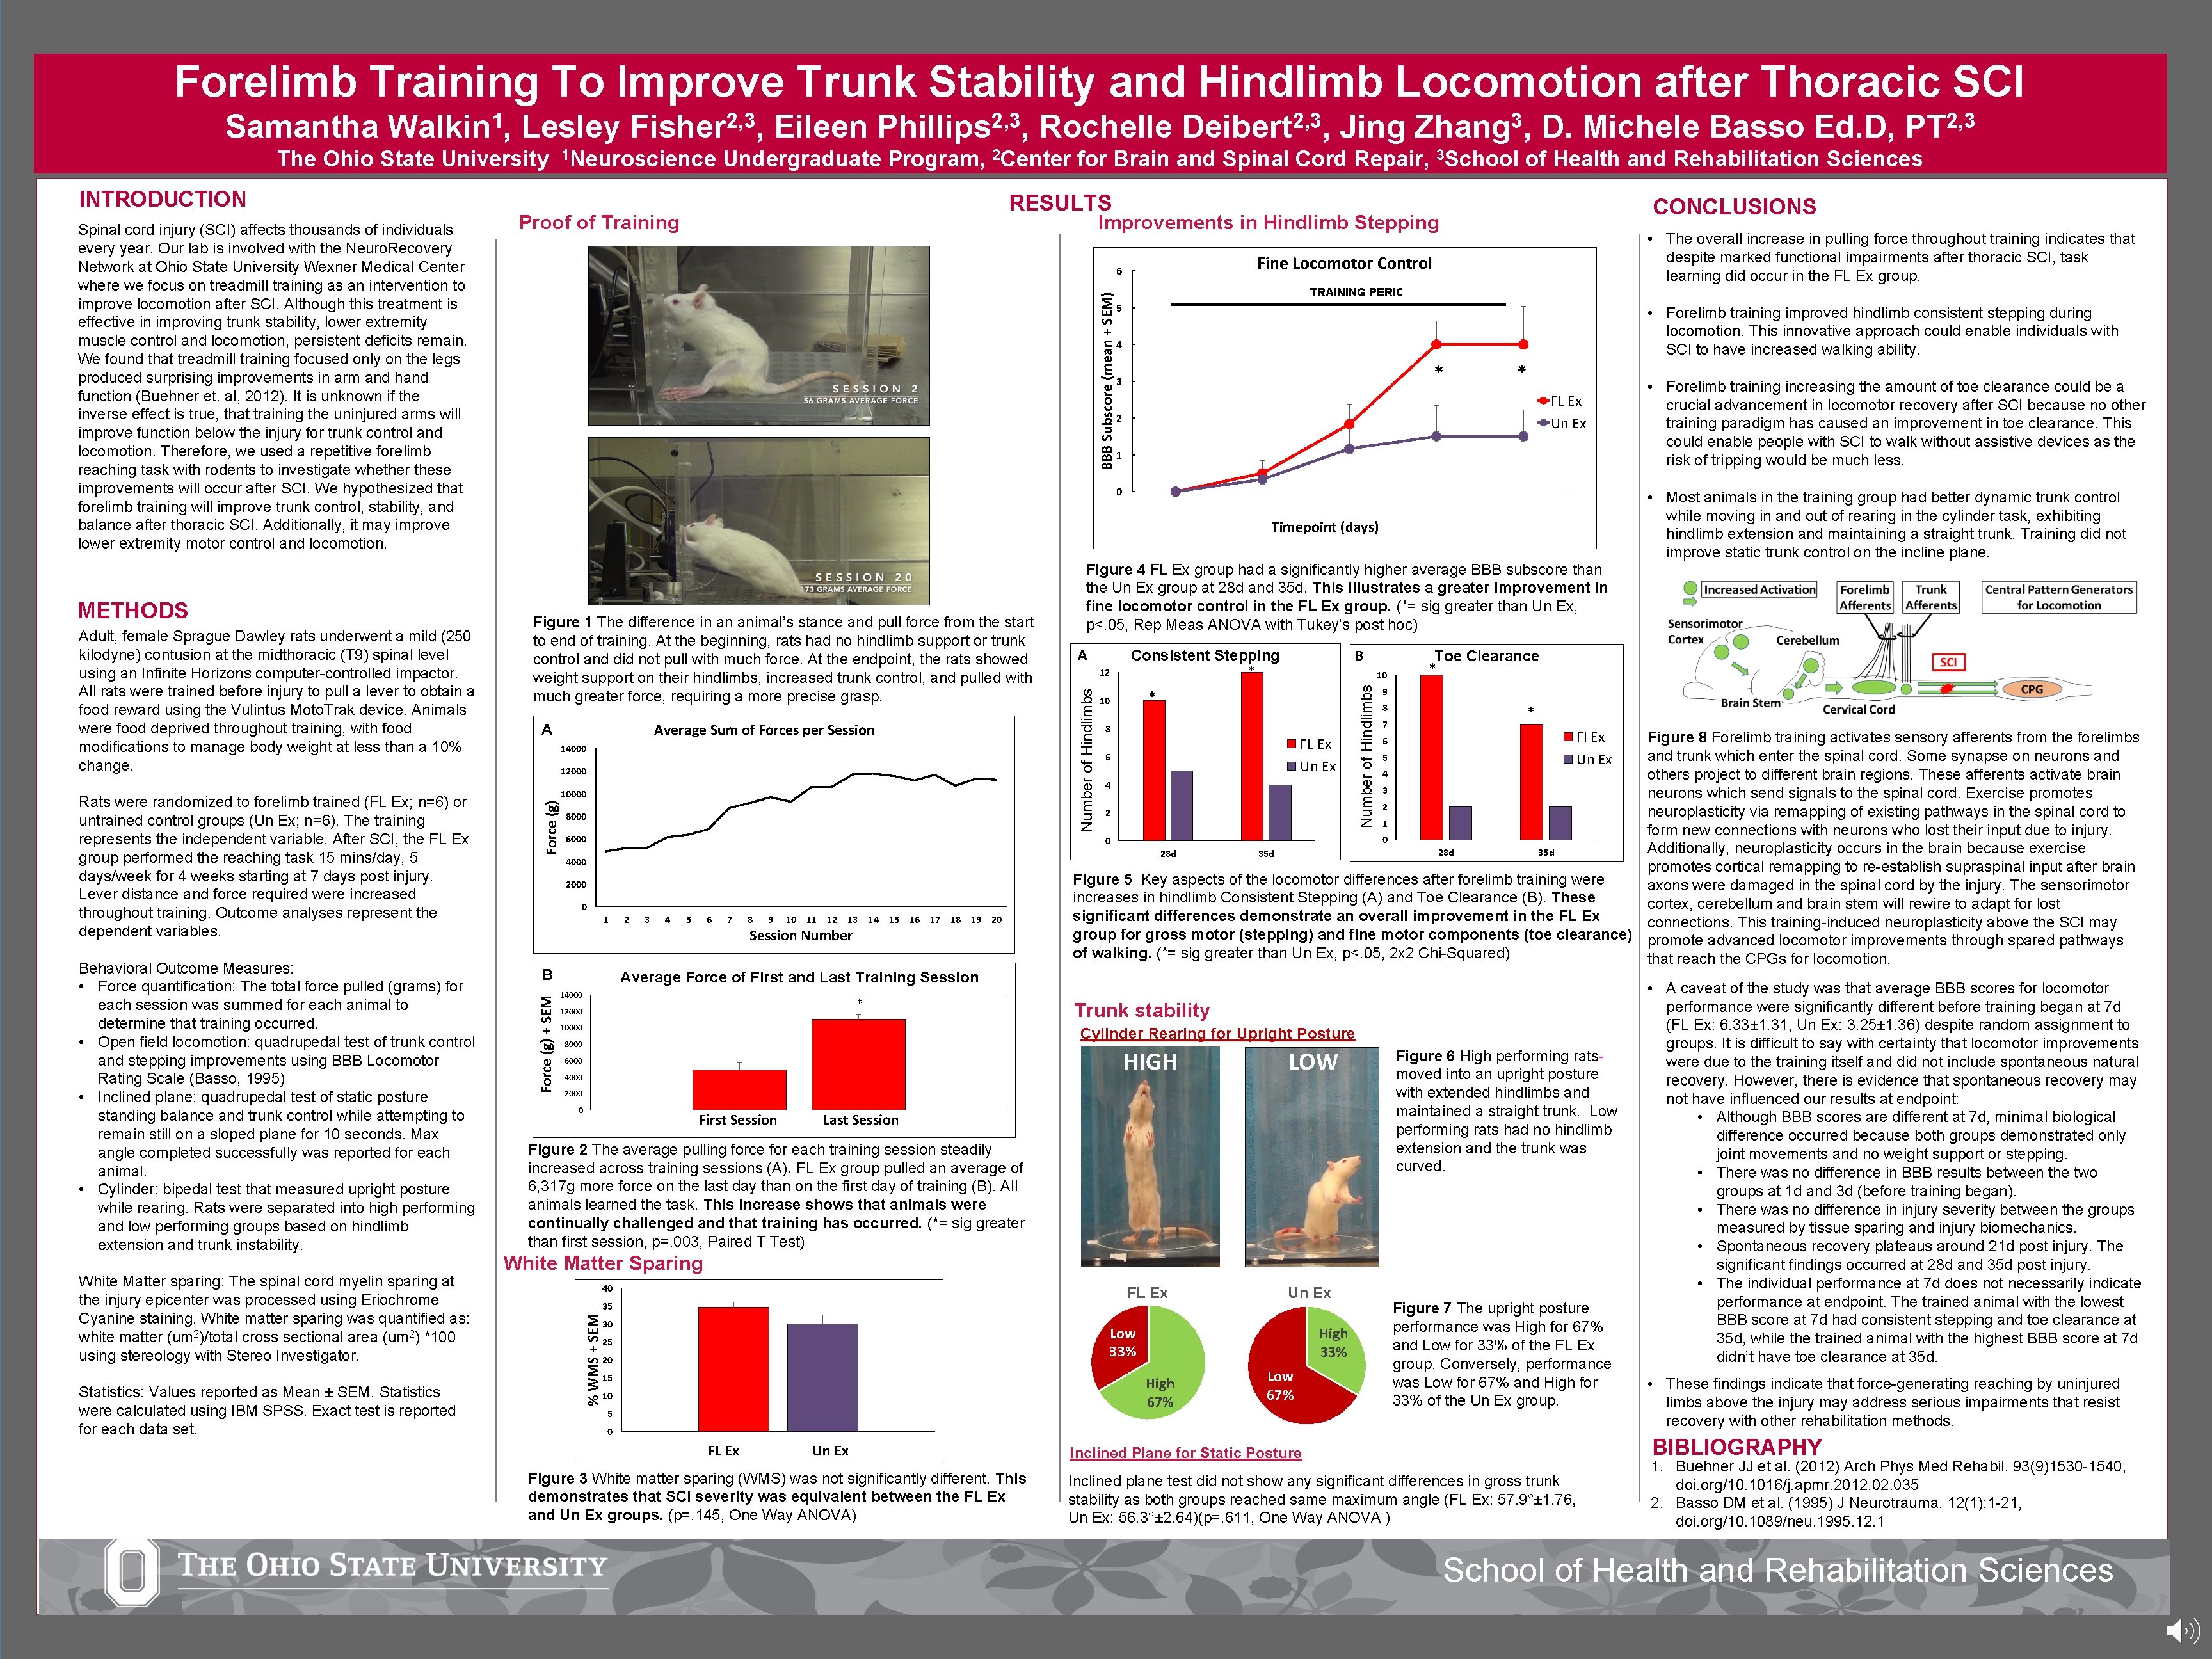 Forelimb Training To Improve Trunk Stability and Hindlimb Locomotion after Thoracic SCI Samantha 1